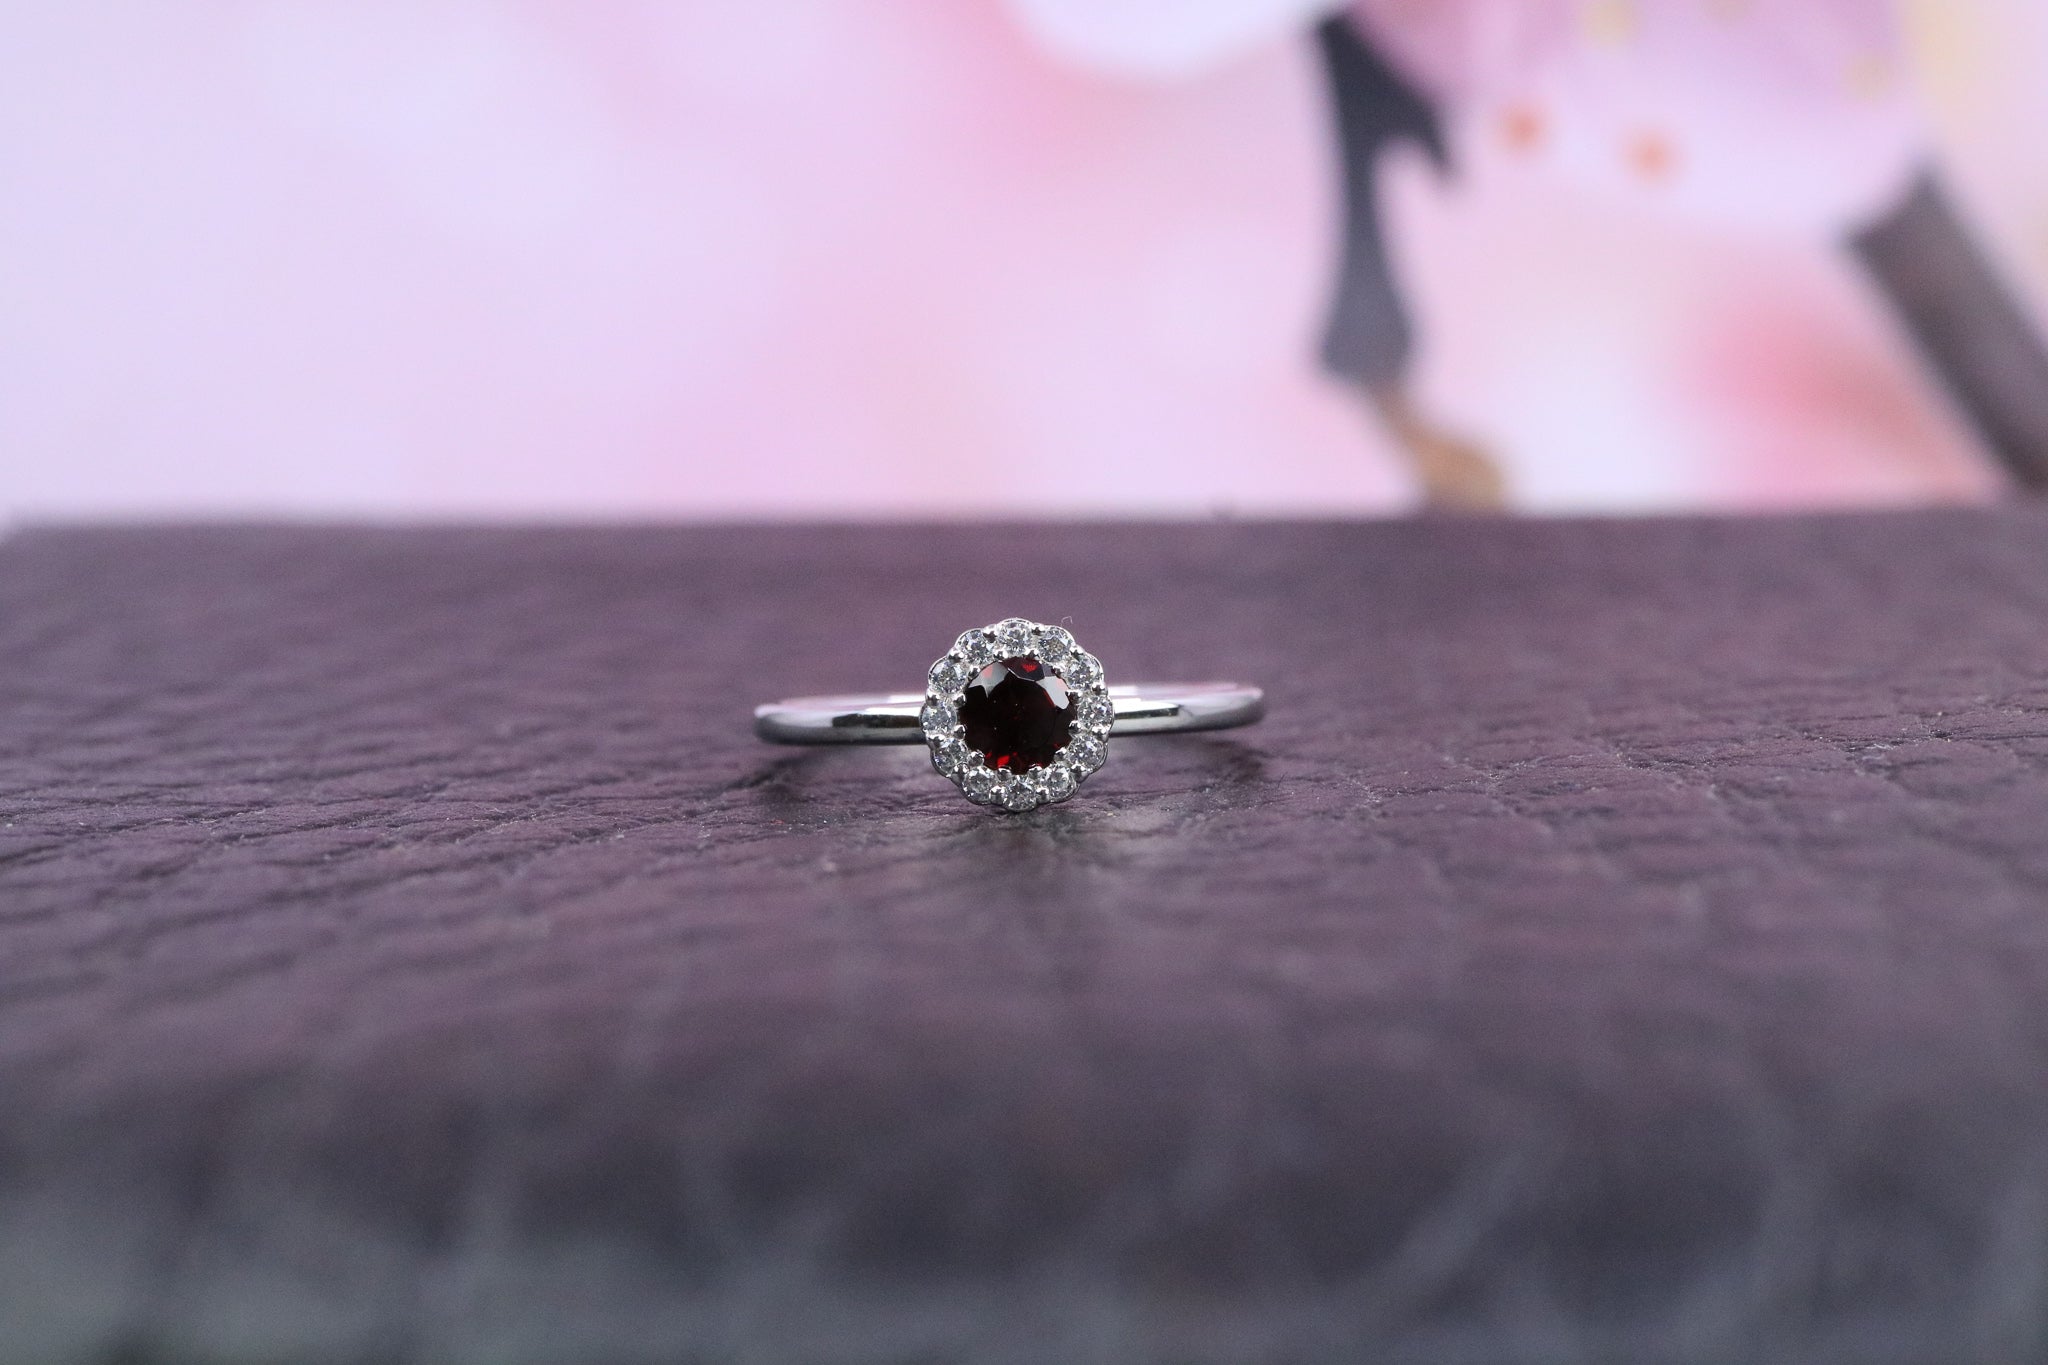 Sterling Silver & January Birthstone Ring - AK1096 - Hallmark Jewellers Formby & The Jewellers Bench Widnes